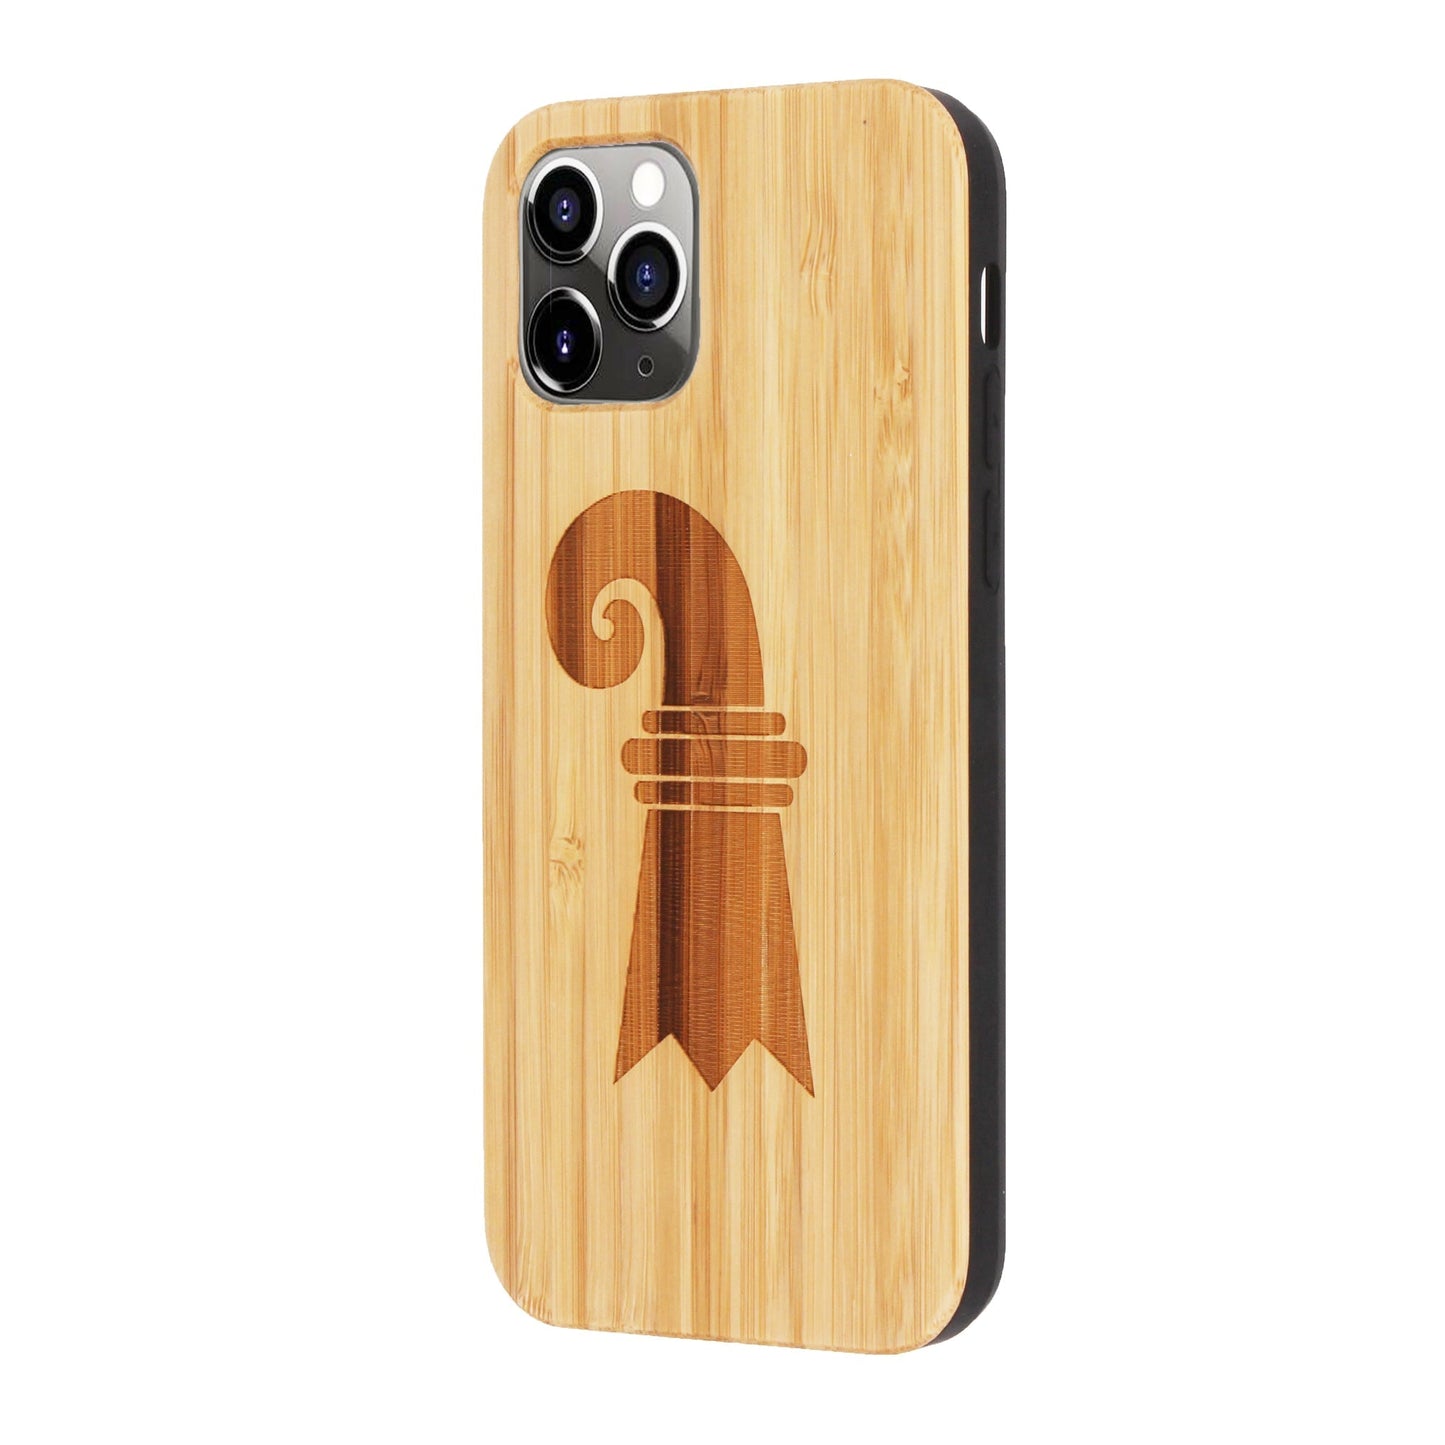 Baslerstab Eden case made of bamboo for iPhone 11 Pro Max